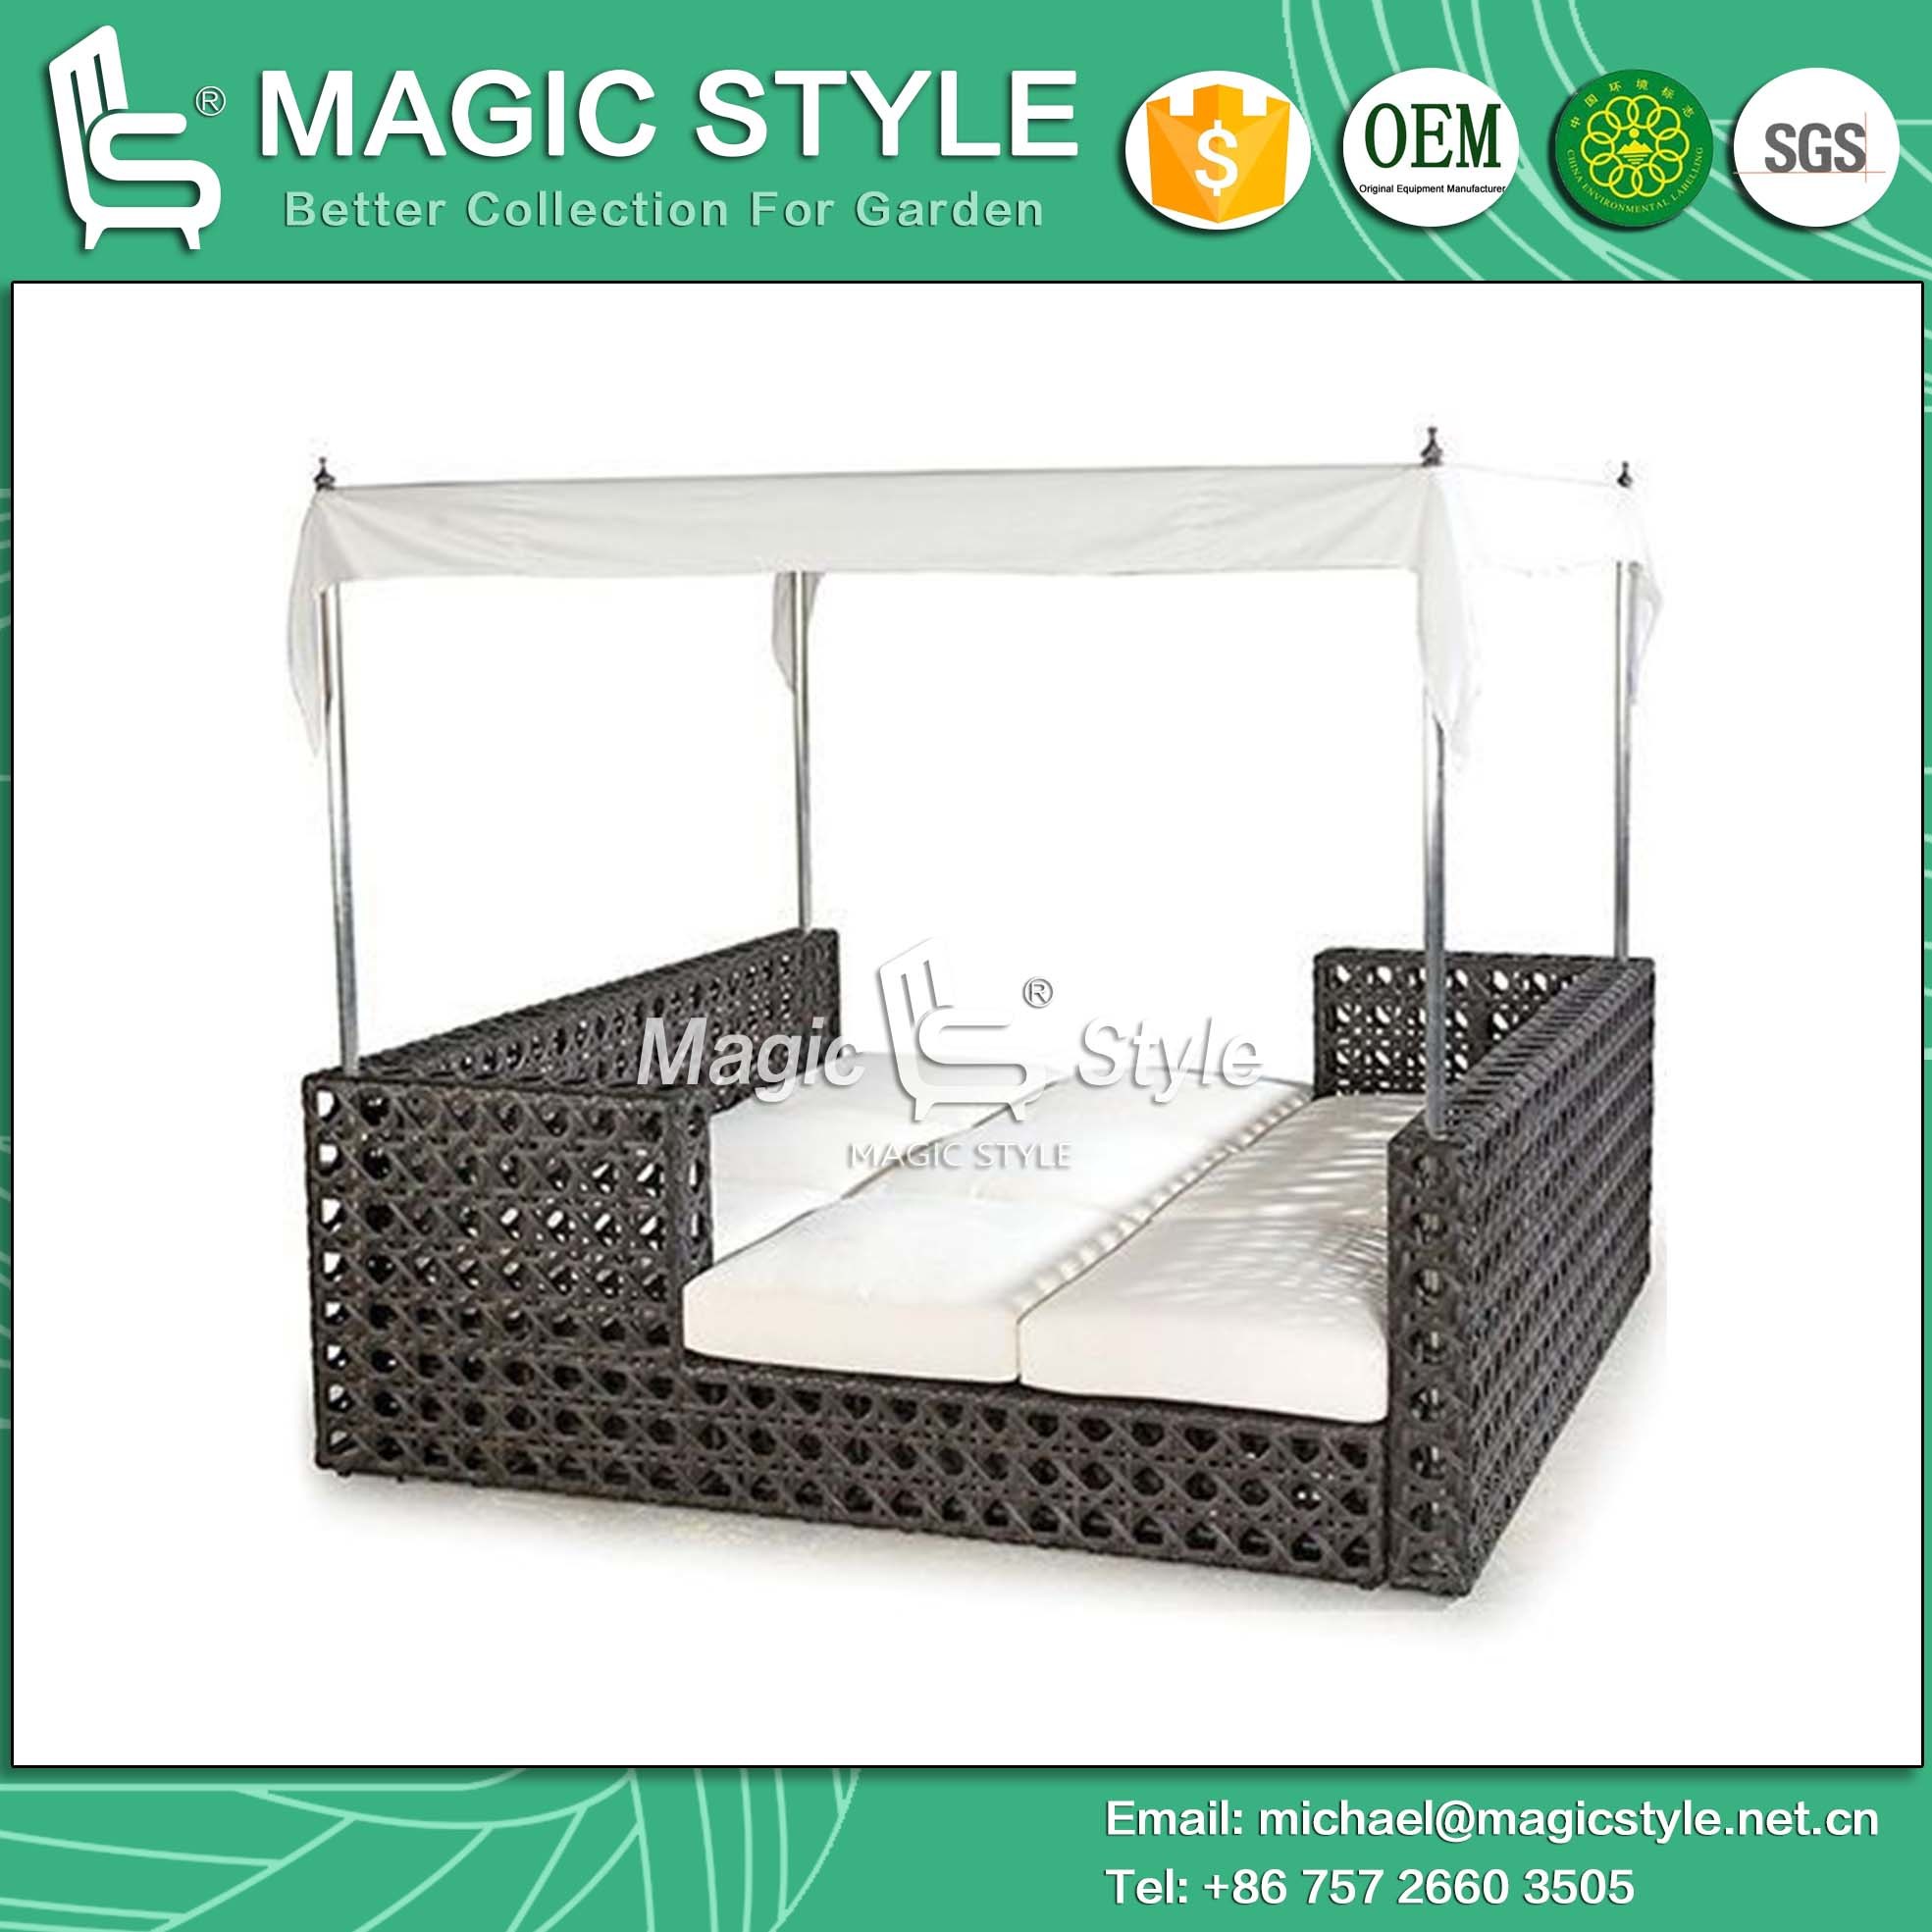 Rattan Daybed Wicker Sun Bed Outdoor Furniture Garden Sun Lounge Leisure Daybed Beach Sunbed Patio Daybed Deck Lounge (Magic Style)